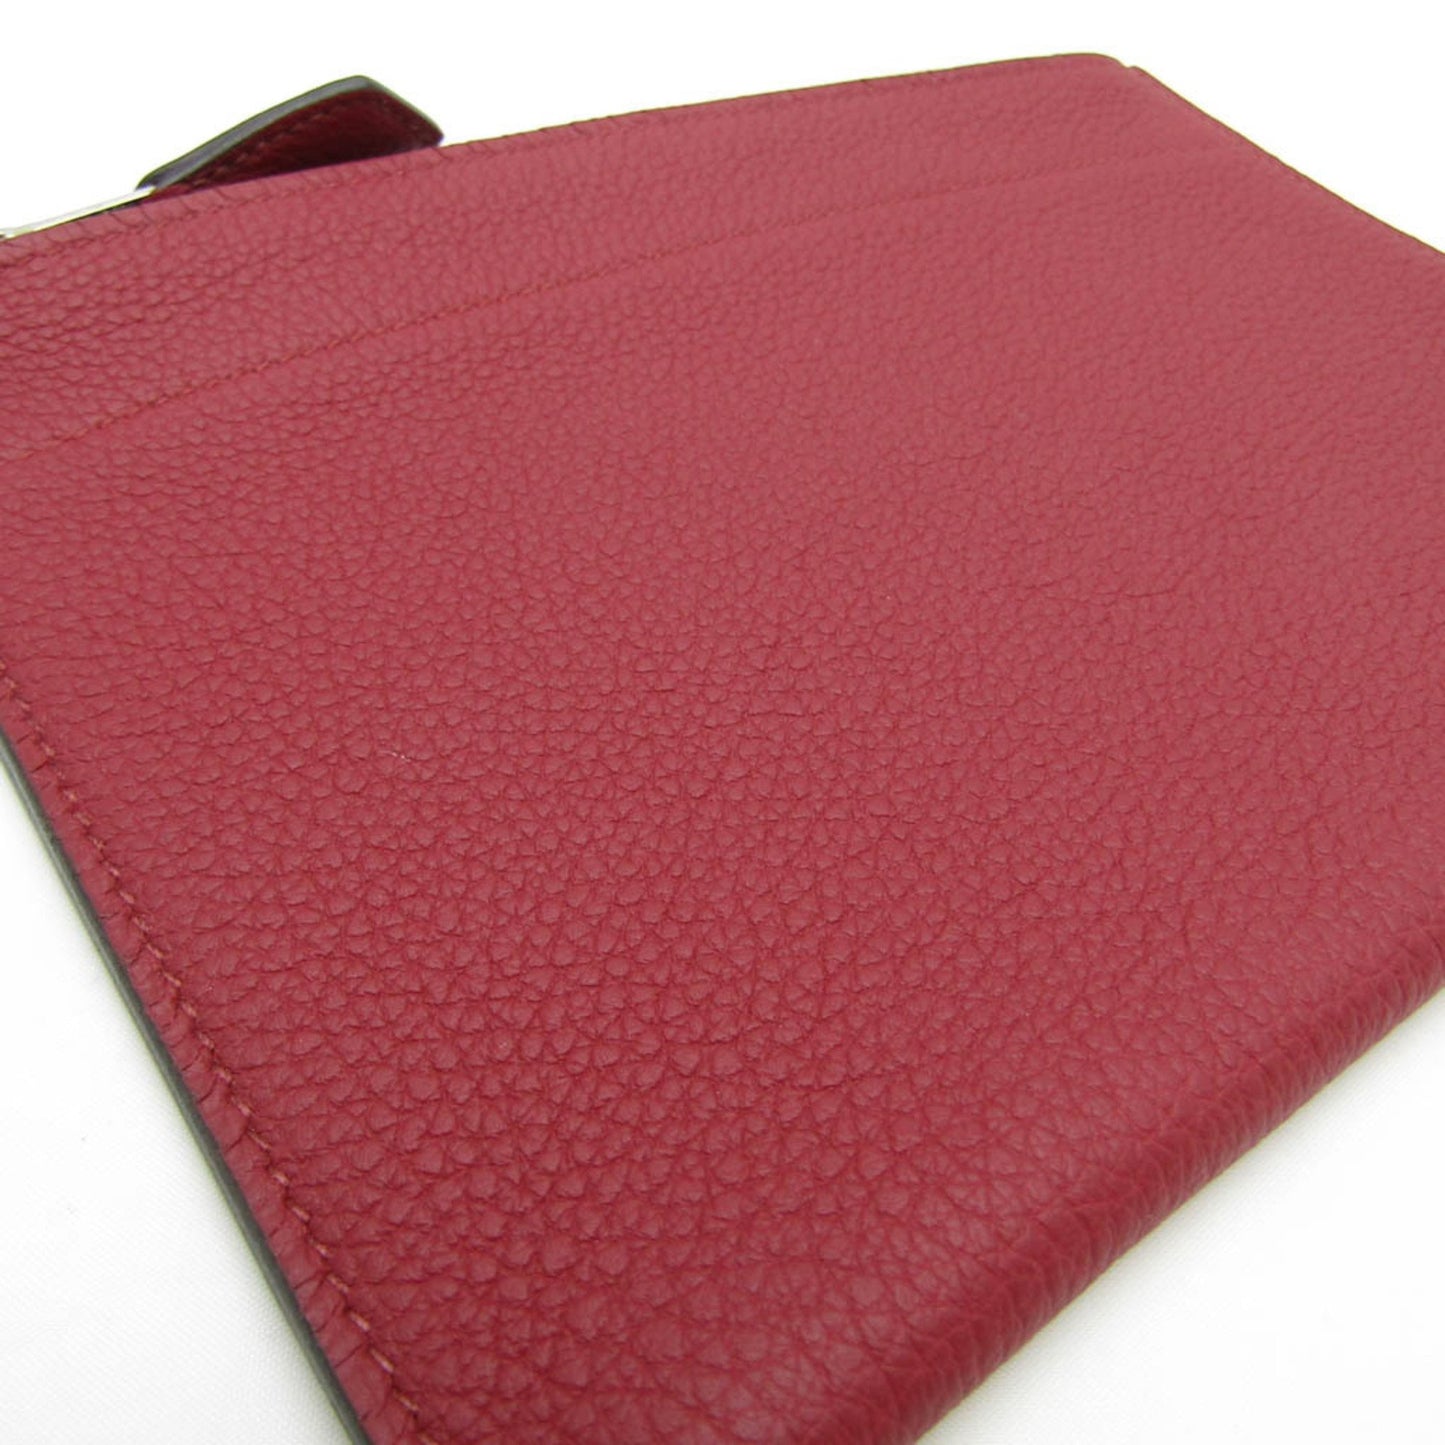 Hermes Women's Sophisticated Garnet Leather Clutch in Red